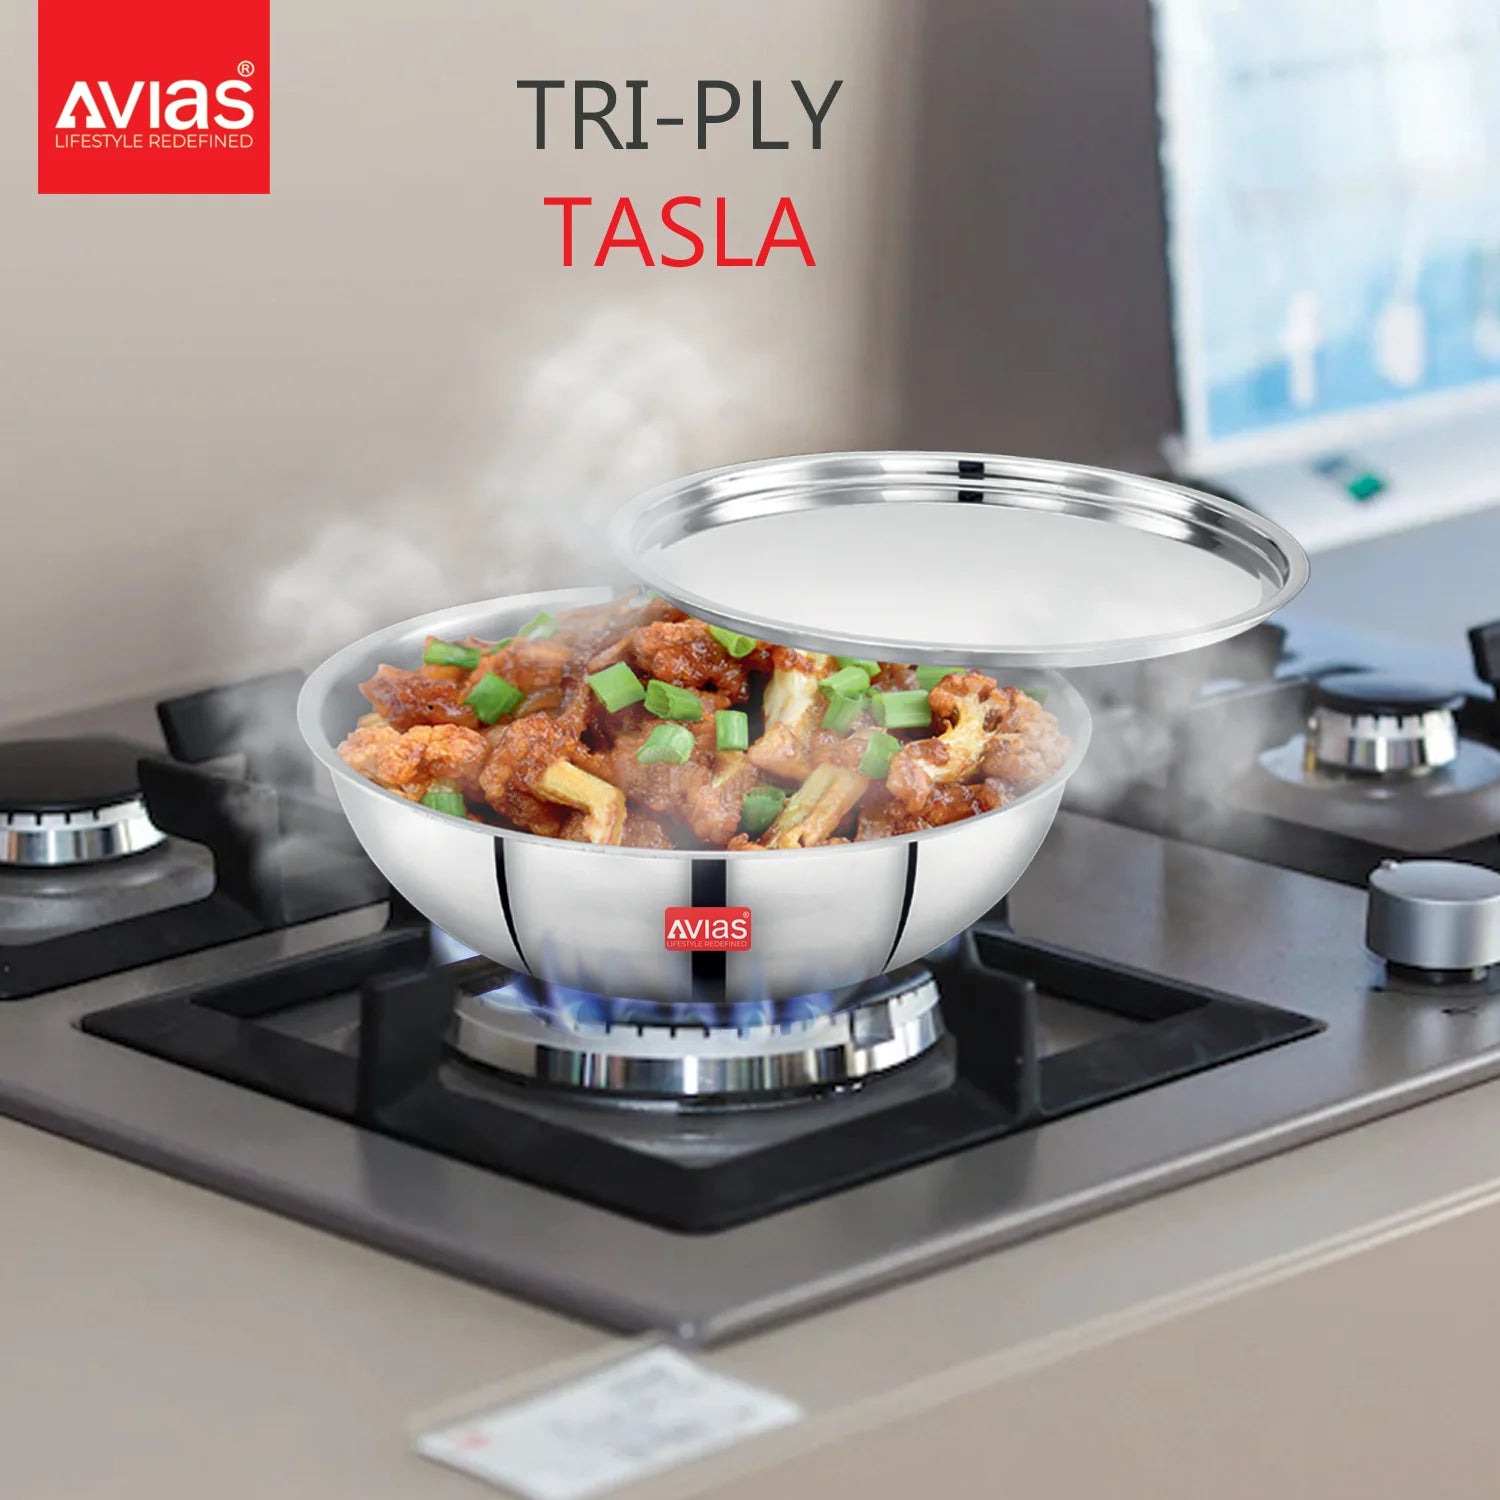 AVIAS Riara premium stainless steel Triply Tasla on stove for cooking quality food